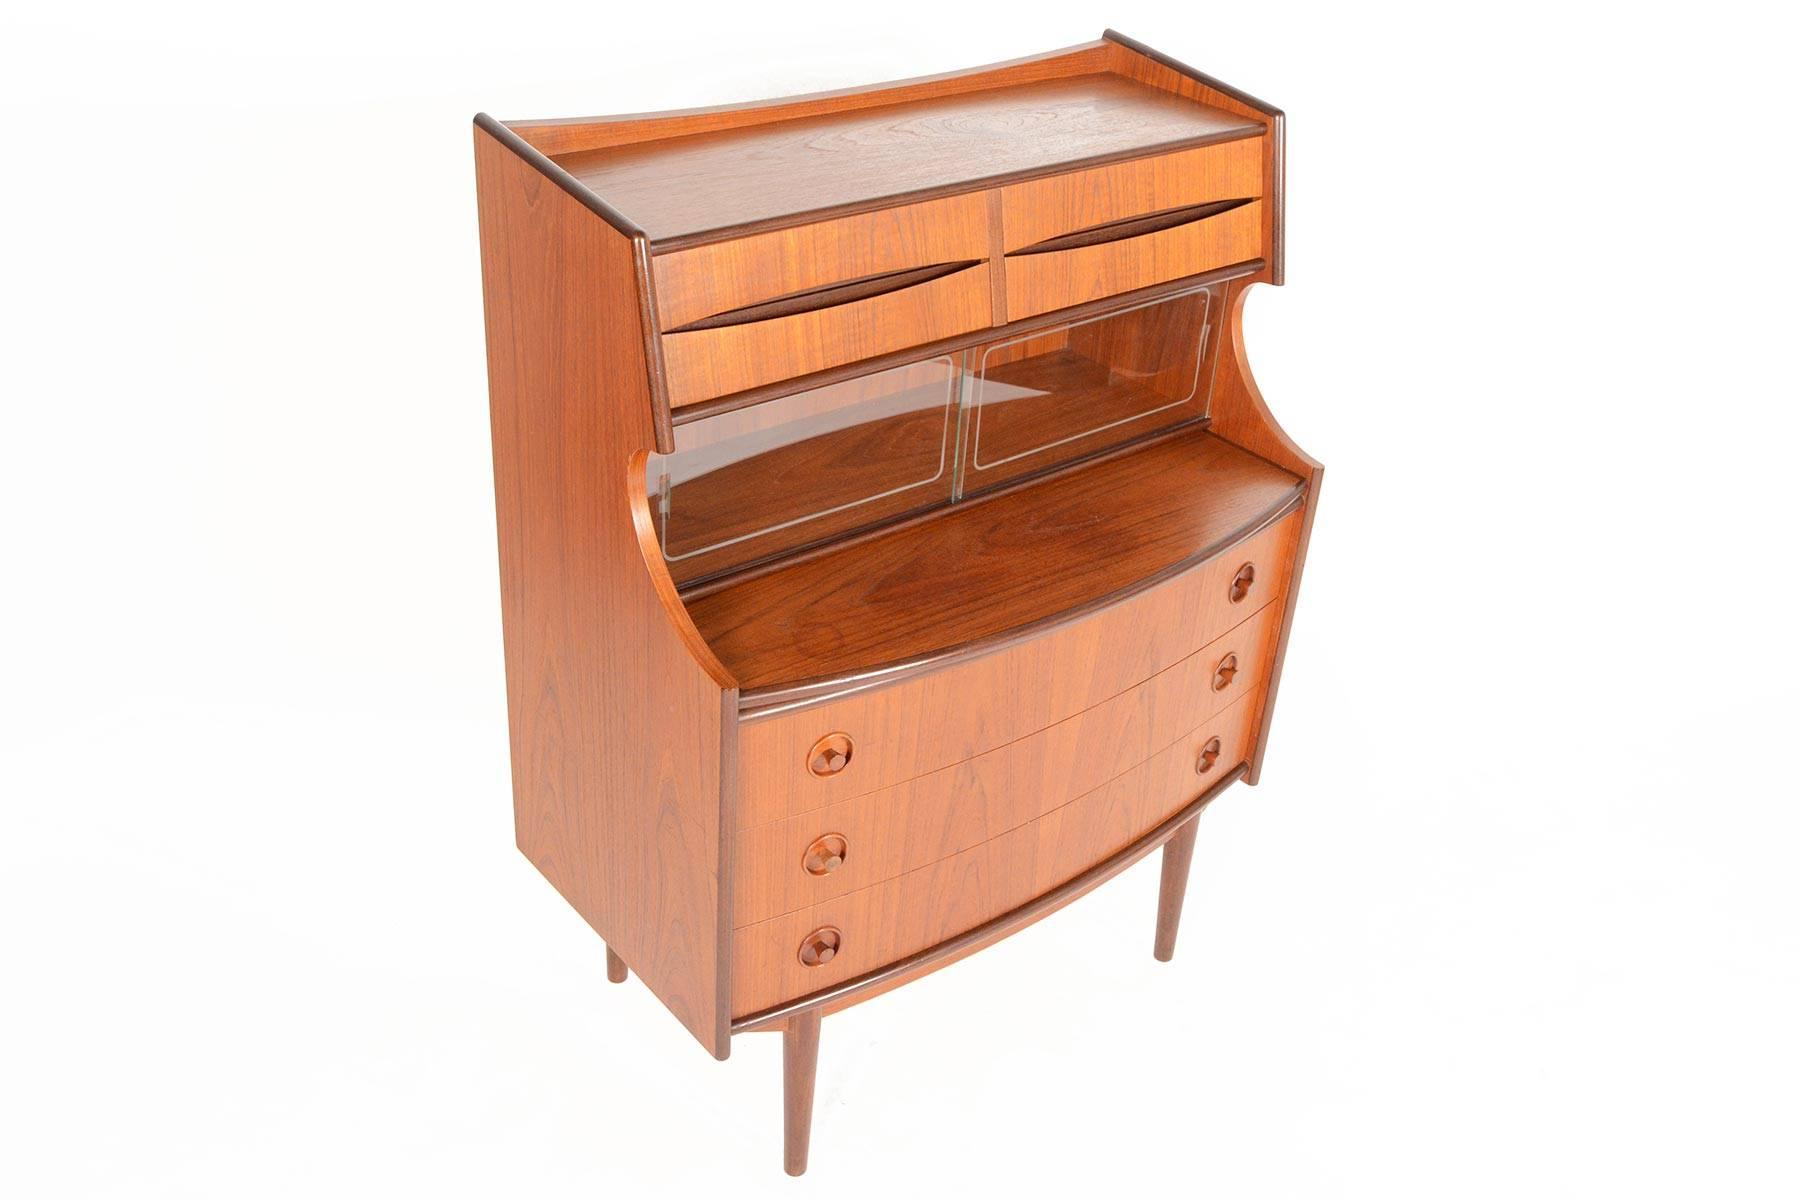 This incredible Danish modern secretary desk in teak hails straight from the 1960s! The center of this piece features a pullout desk and provides a spacious work surface. Two etched glass doors sit above. Four small upper drawers and three large,